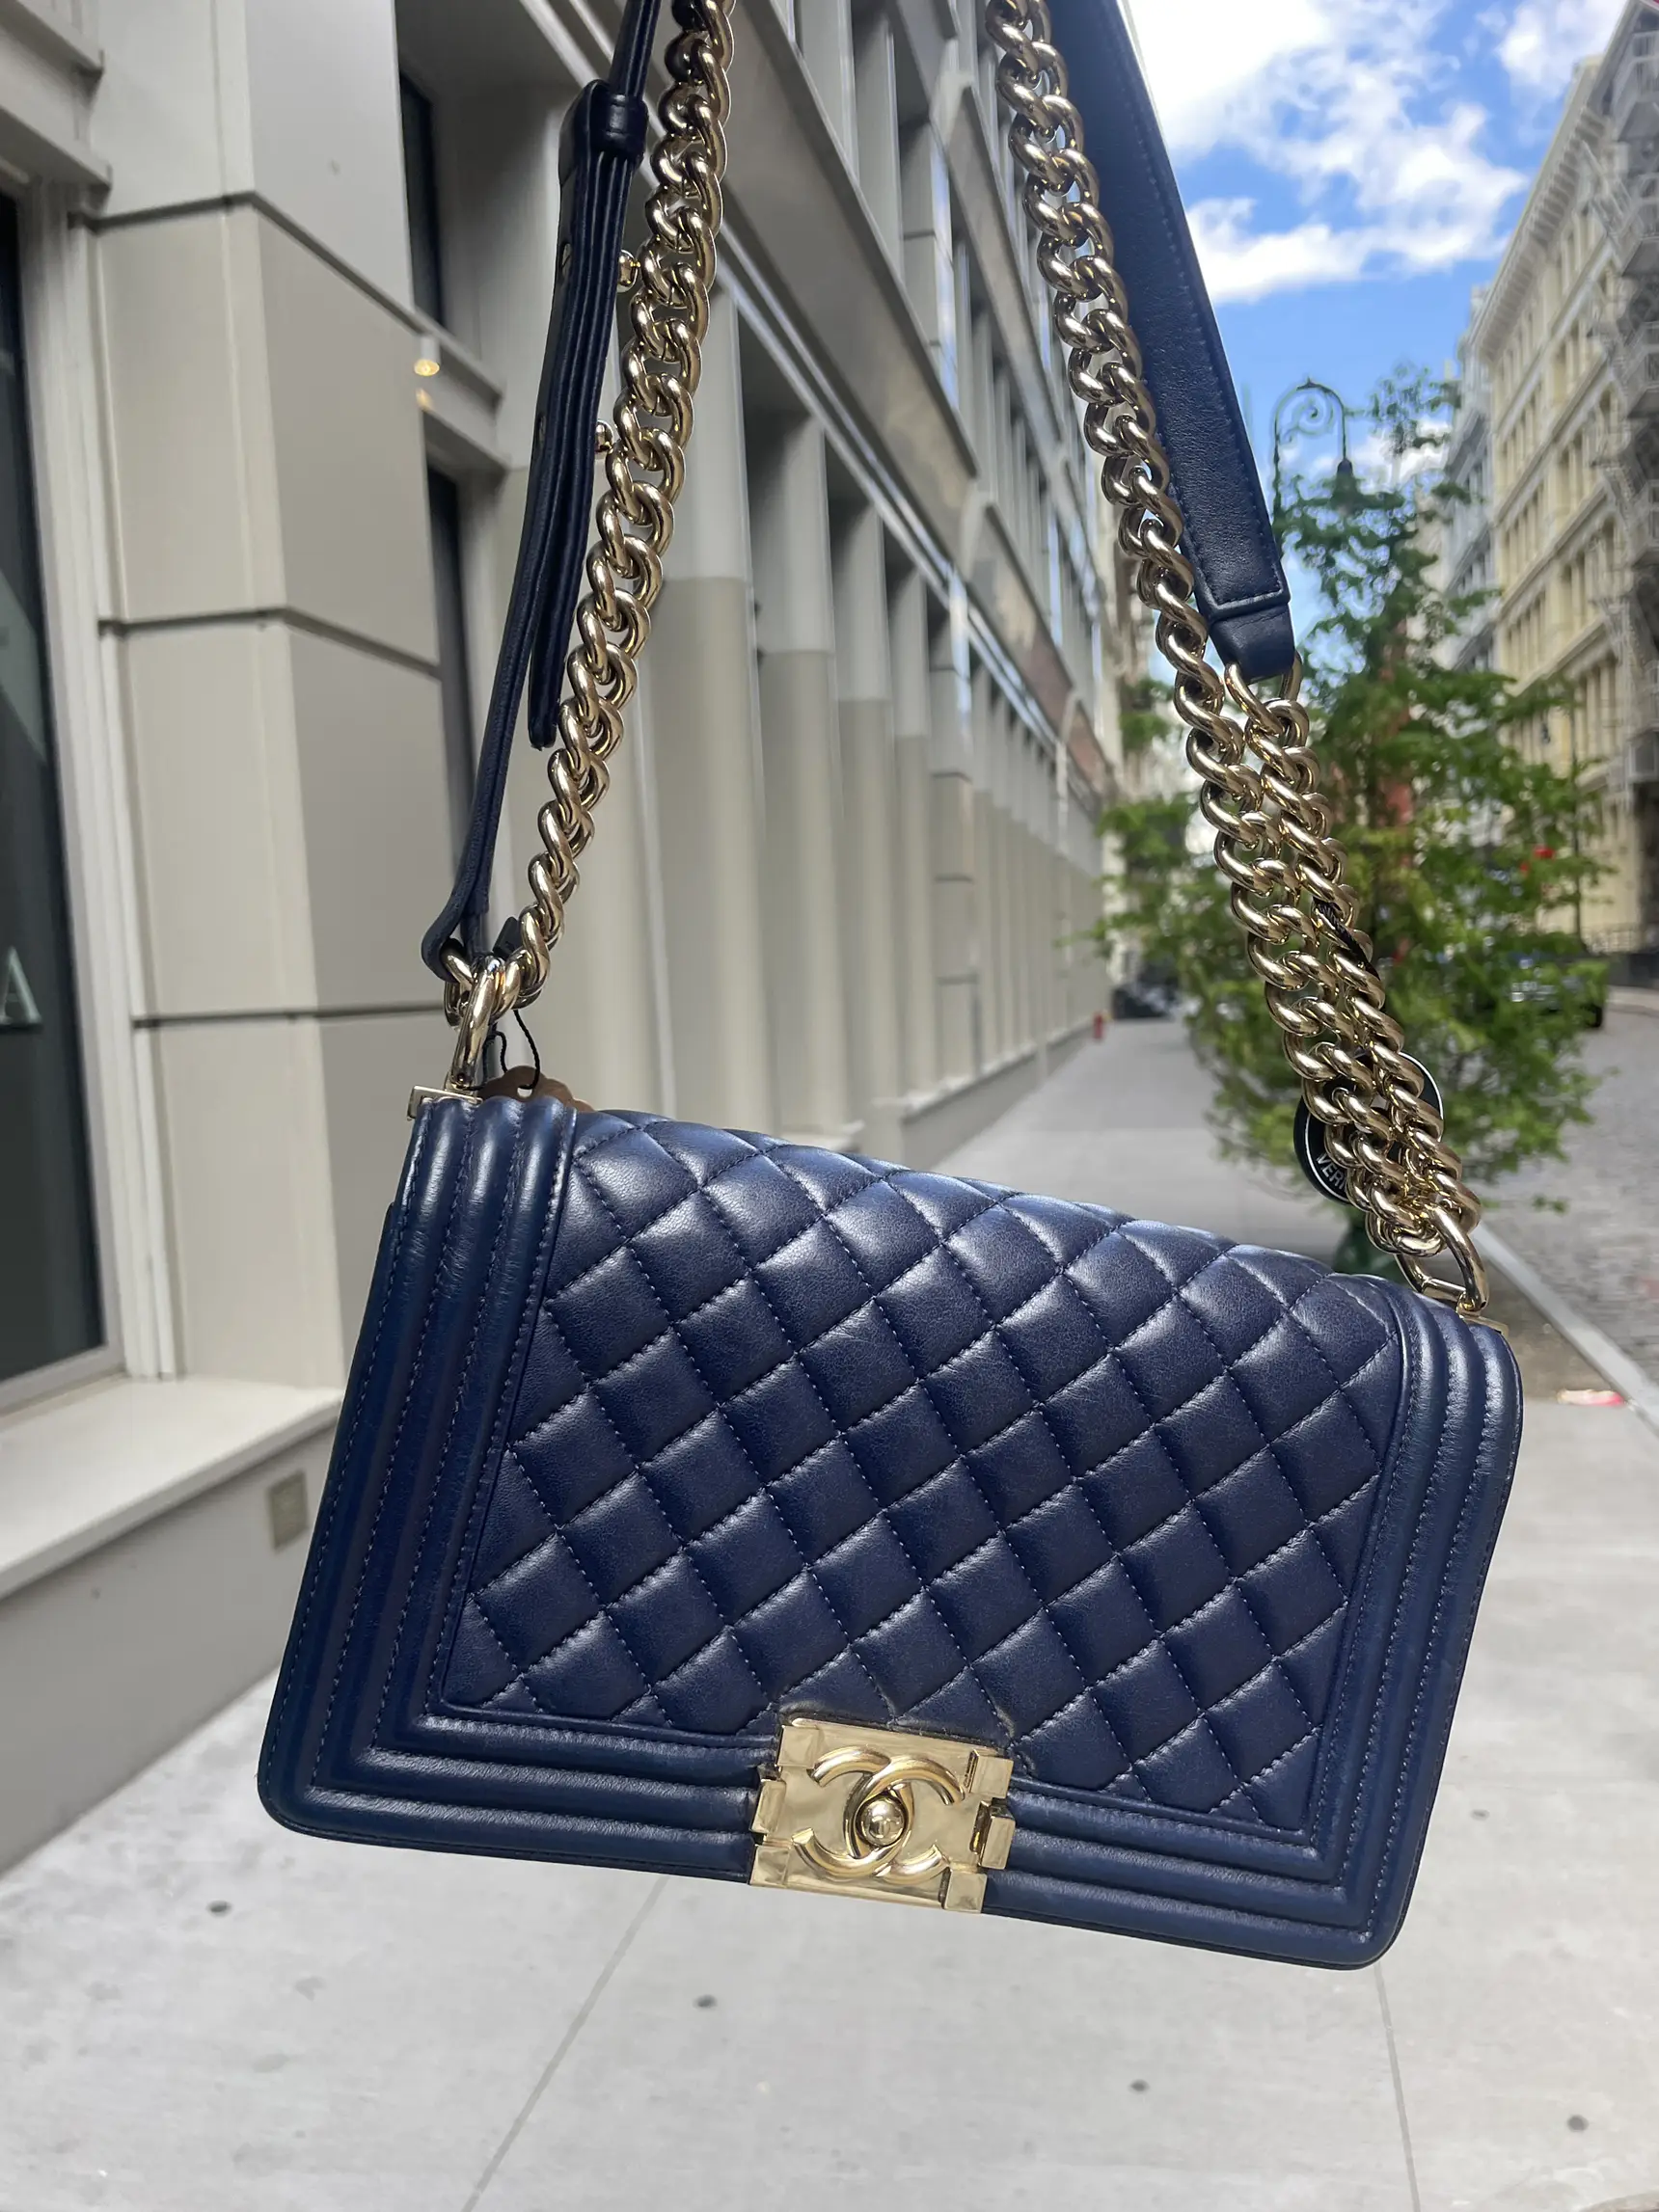 Chanel bag, Gallery posted by MuMu